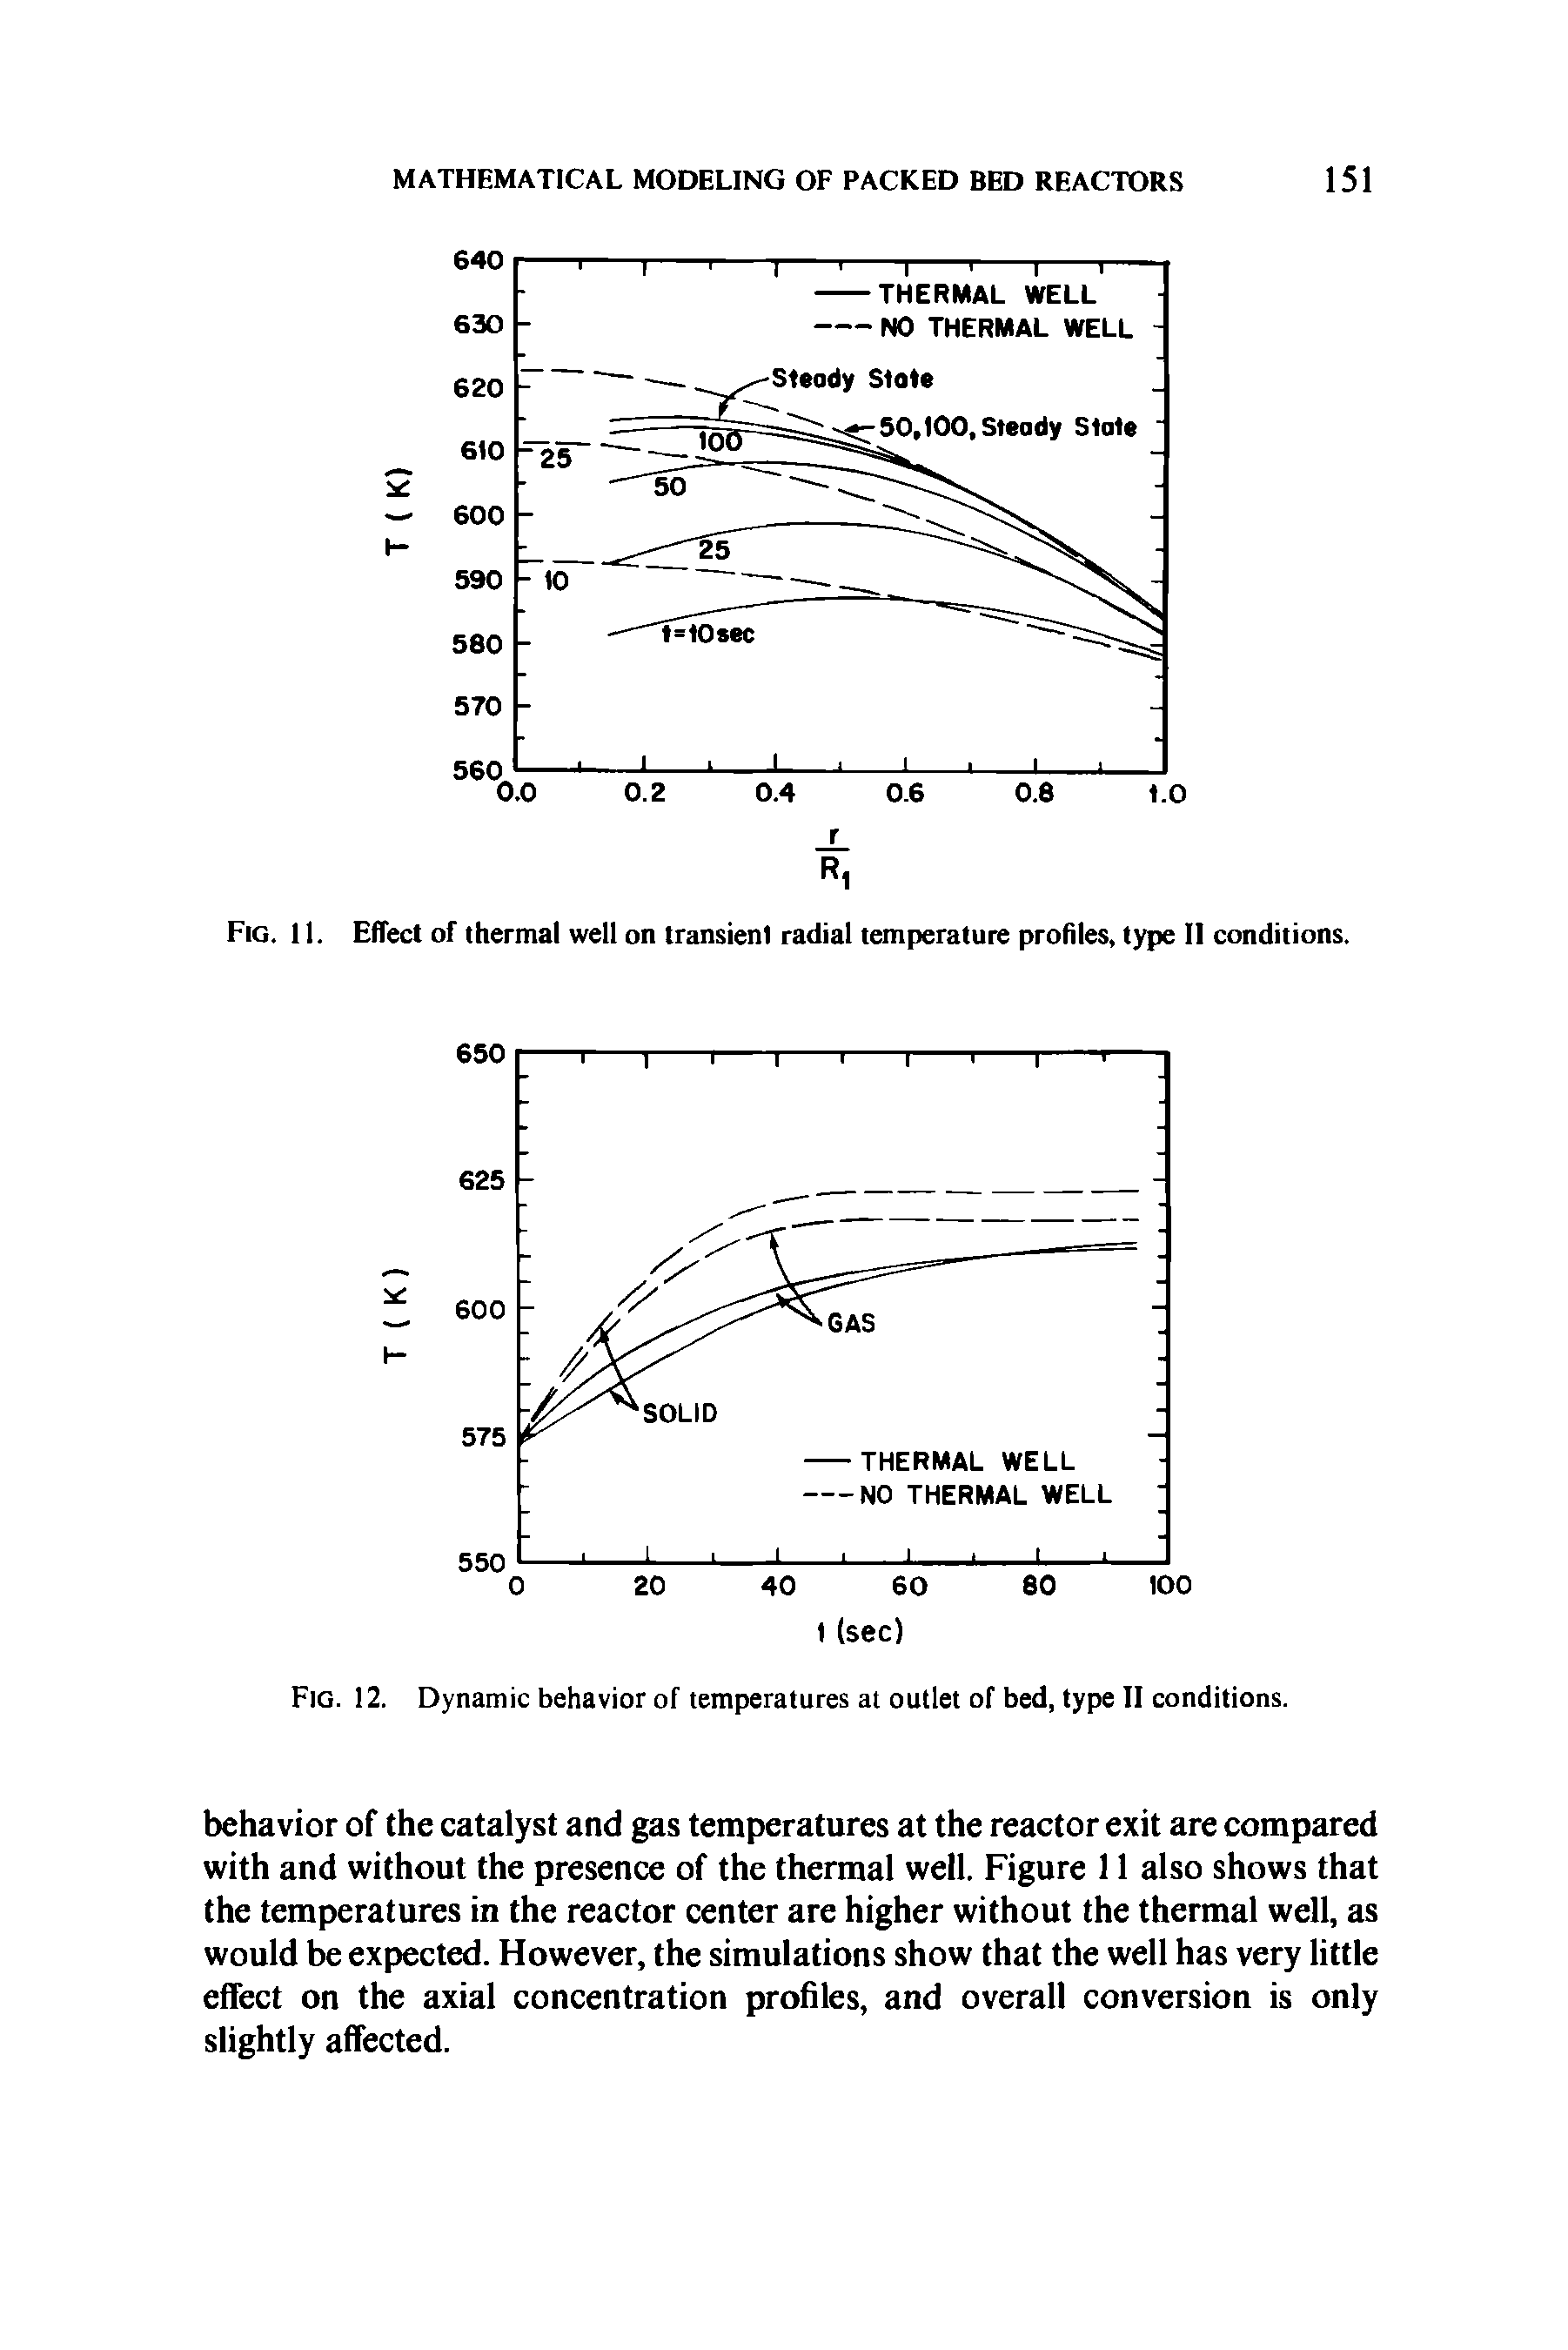 Fig. 11. Effect of thermal well on transient radial temperature profiles, type II conditions.